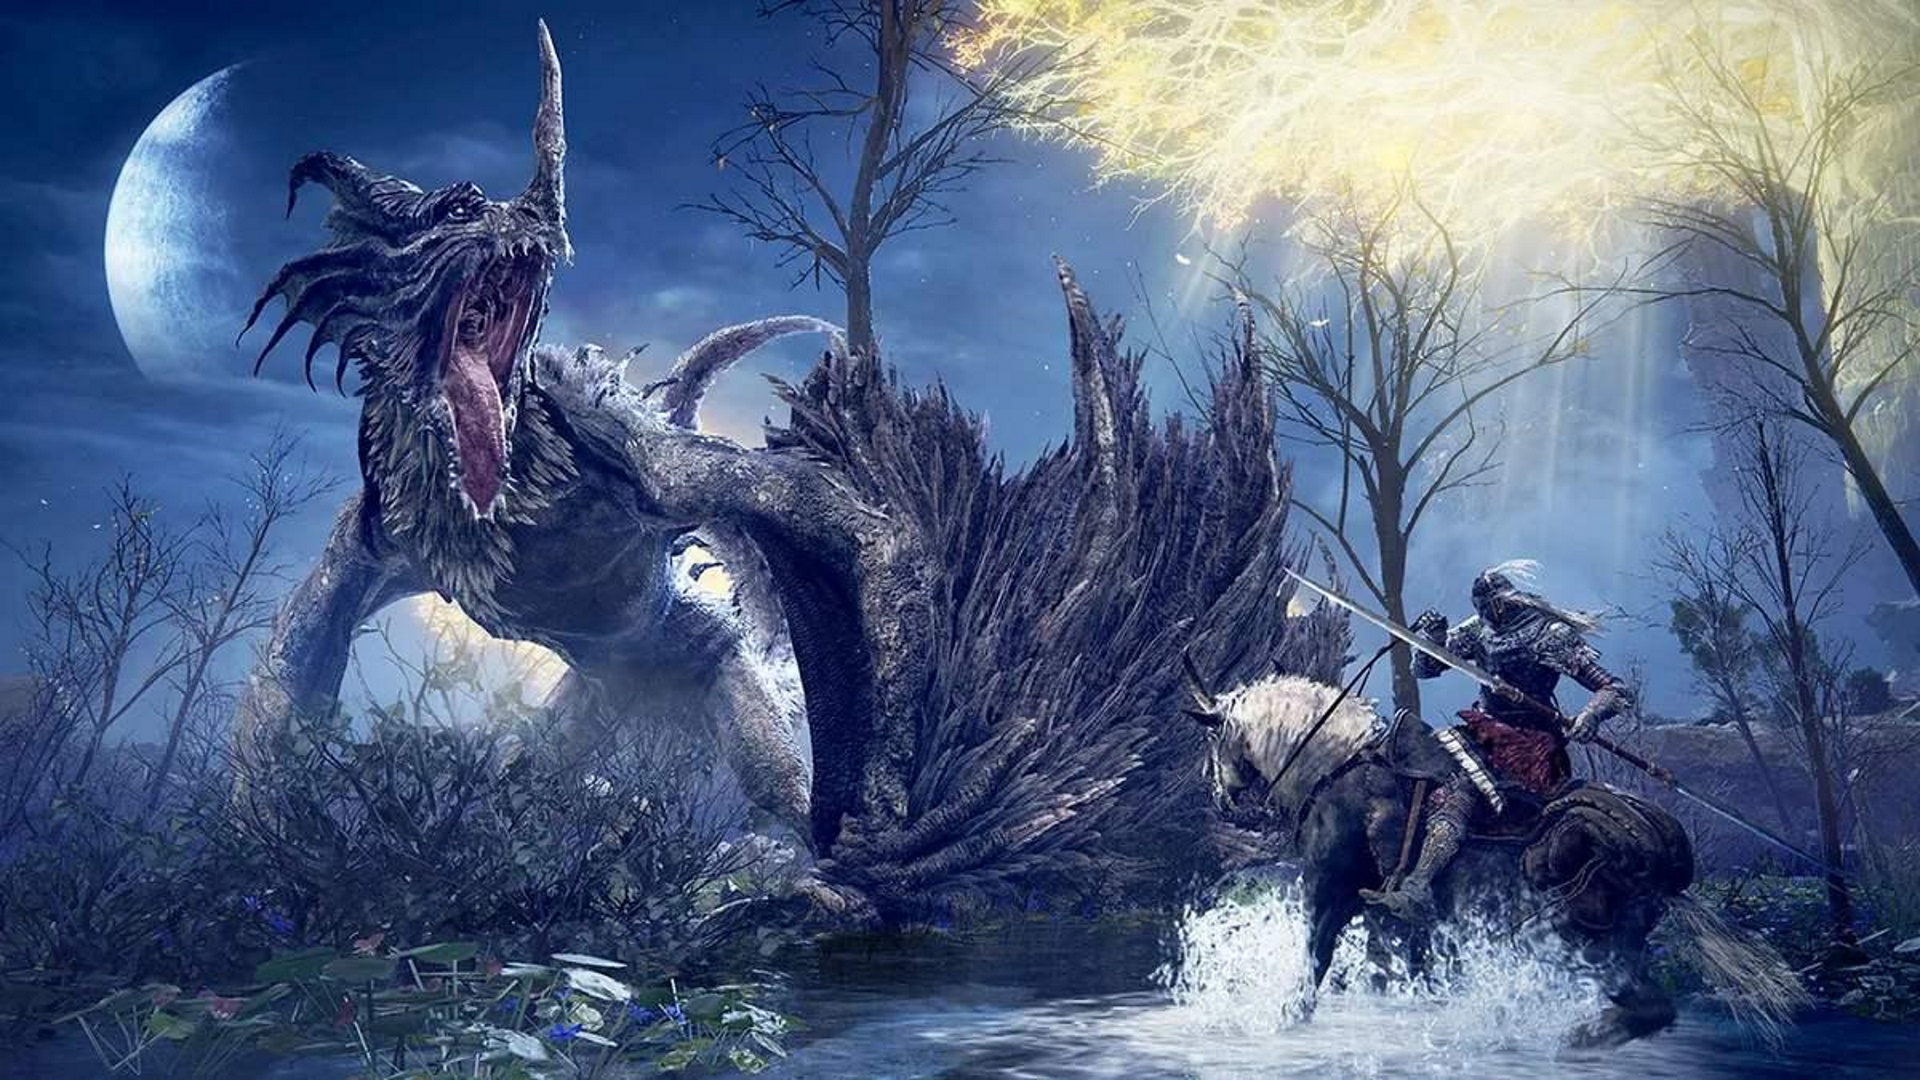 This Elden Ring dragon diorama is absolutely stunning